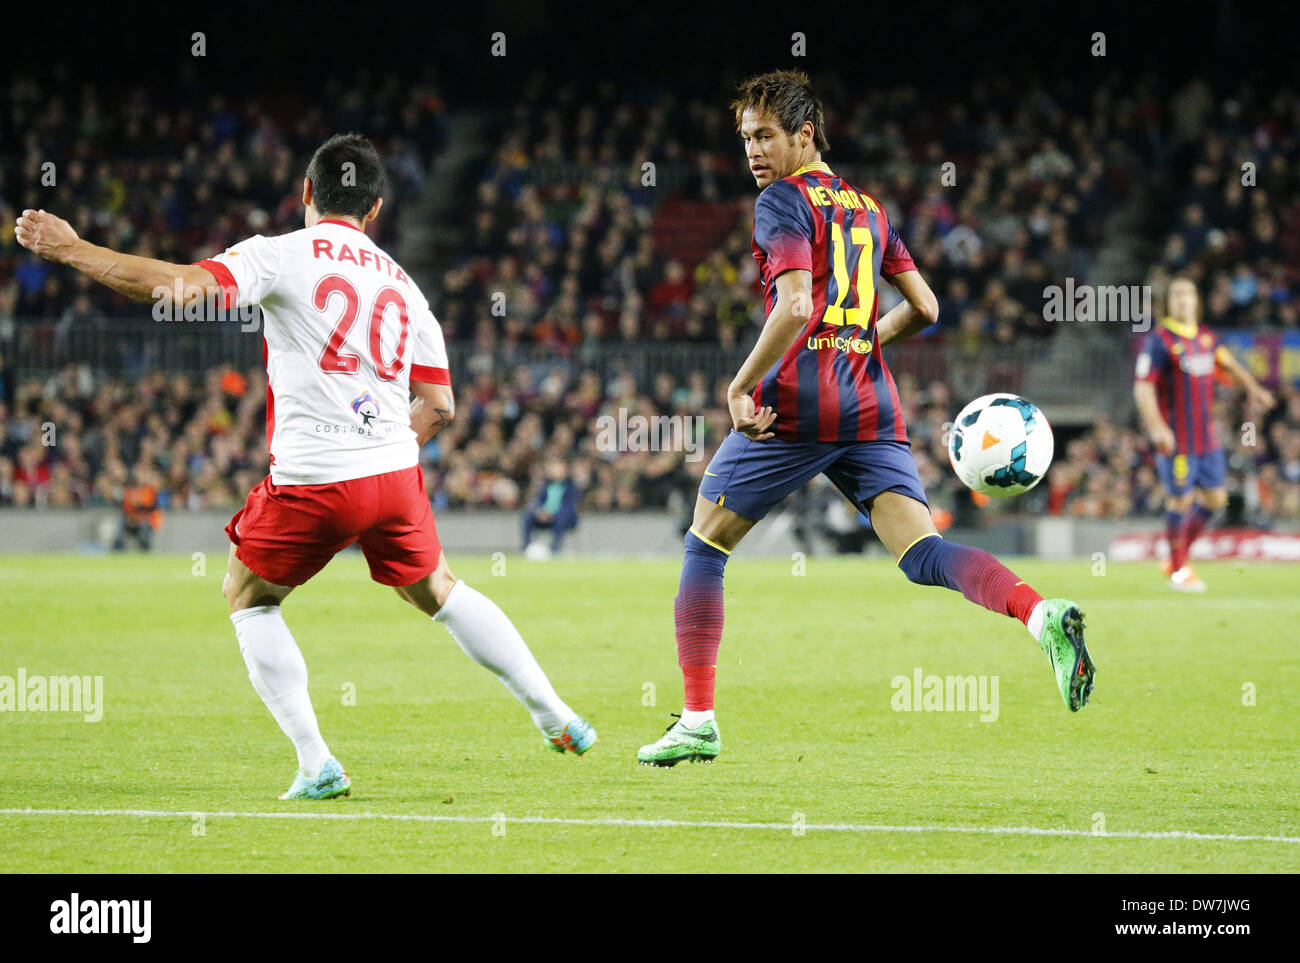 Barcellona, Spain. 2nd Mar, 2014. Leo Messi and Rafita in the match of the day 26 of the Spanish Liga BBVA between FC Barcelona and U.D. Almeria, played at the Camp Nou stadium, the march 02, 2014. Credit:  Urbanandsport/NurPhoto/ZUMAPRESS.com/Alamy Live News Stock Photo